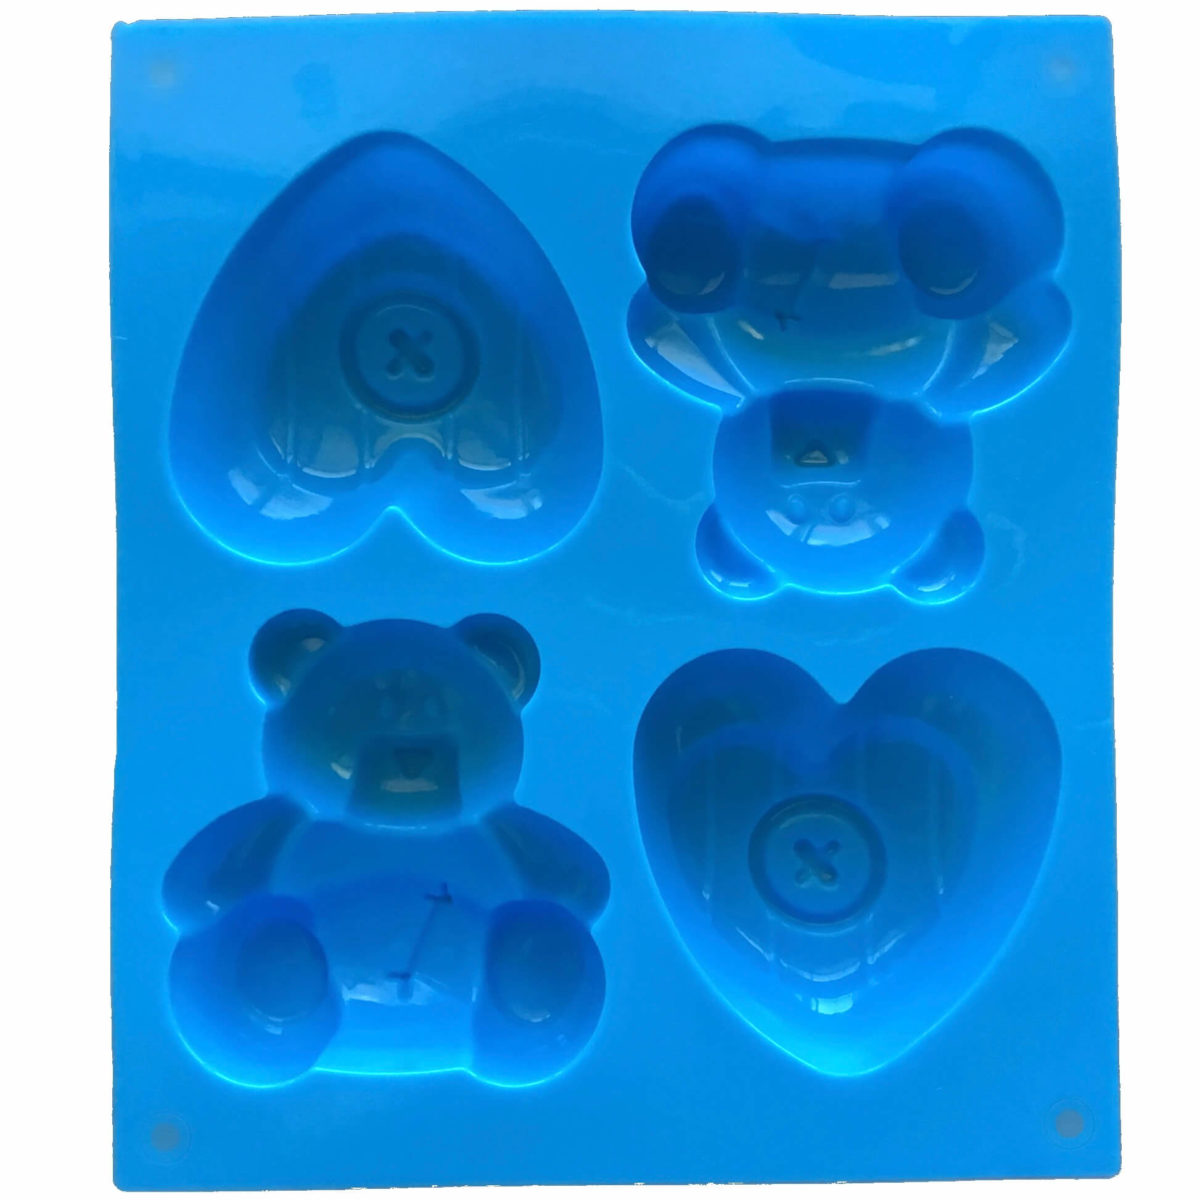 back of large blue silicone mould with four cavites - two each of toy teddy bear and a heart with a button in the middle showing mould cavity details